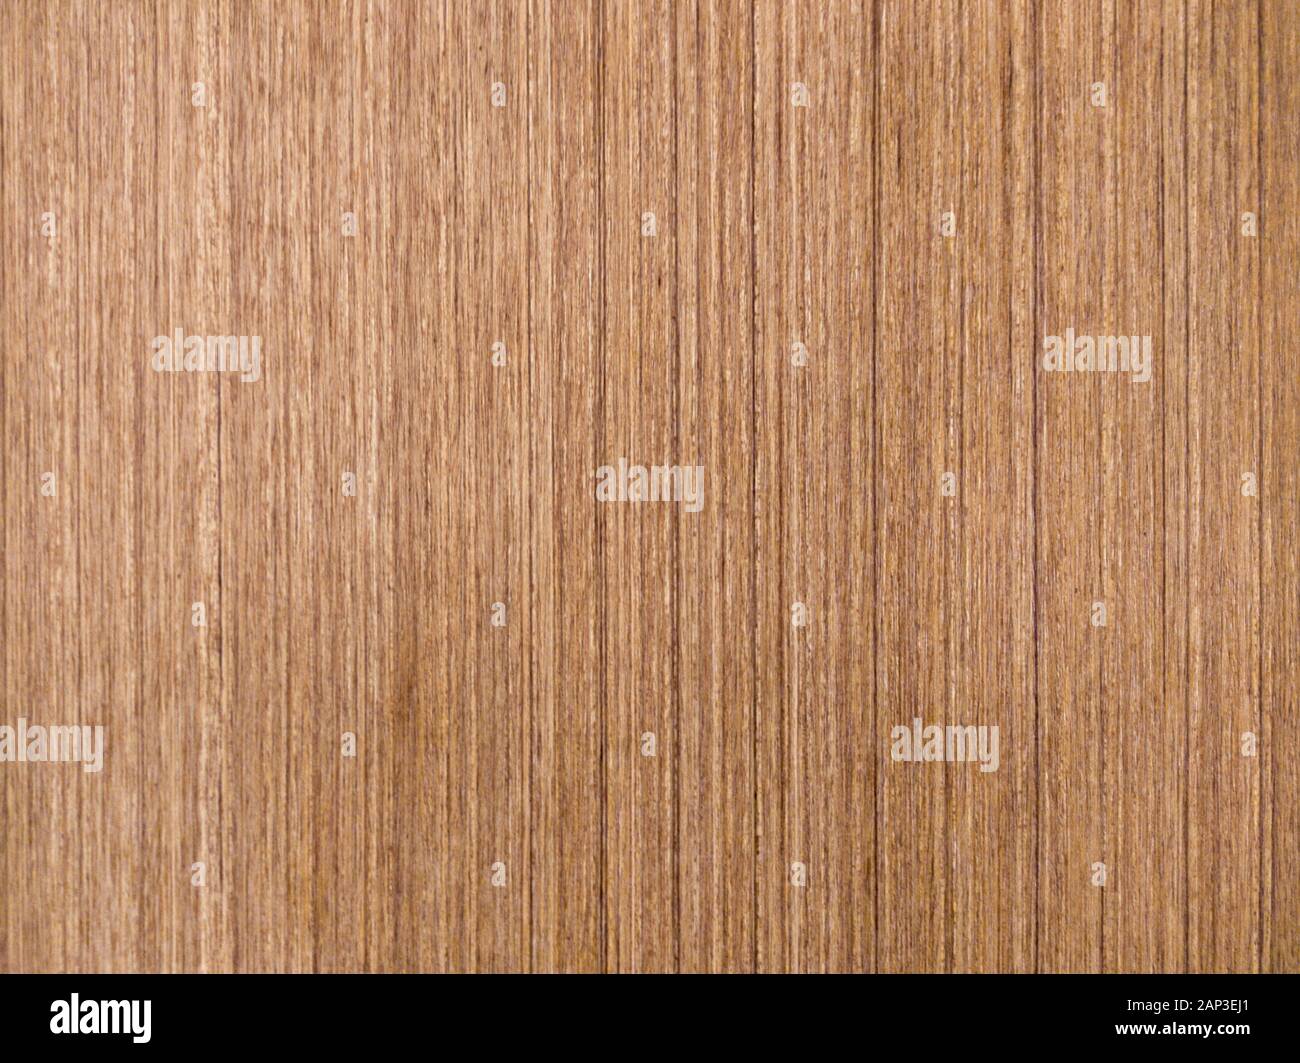 Wood texture background - wooden surface, vertical stripes Stock Photo